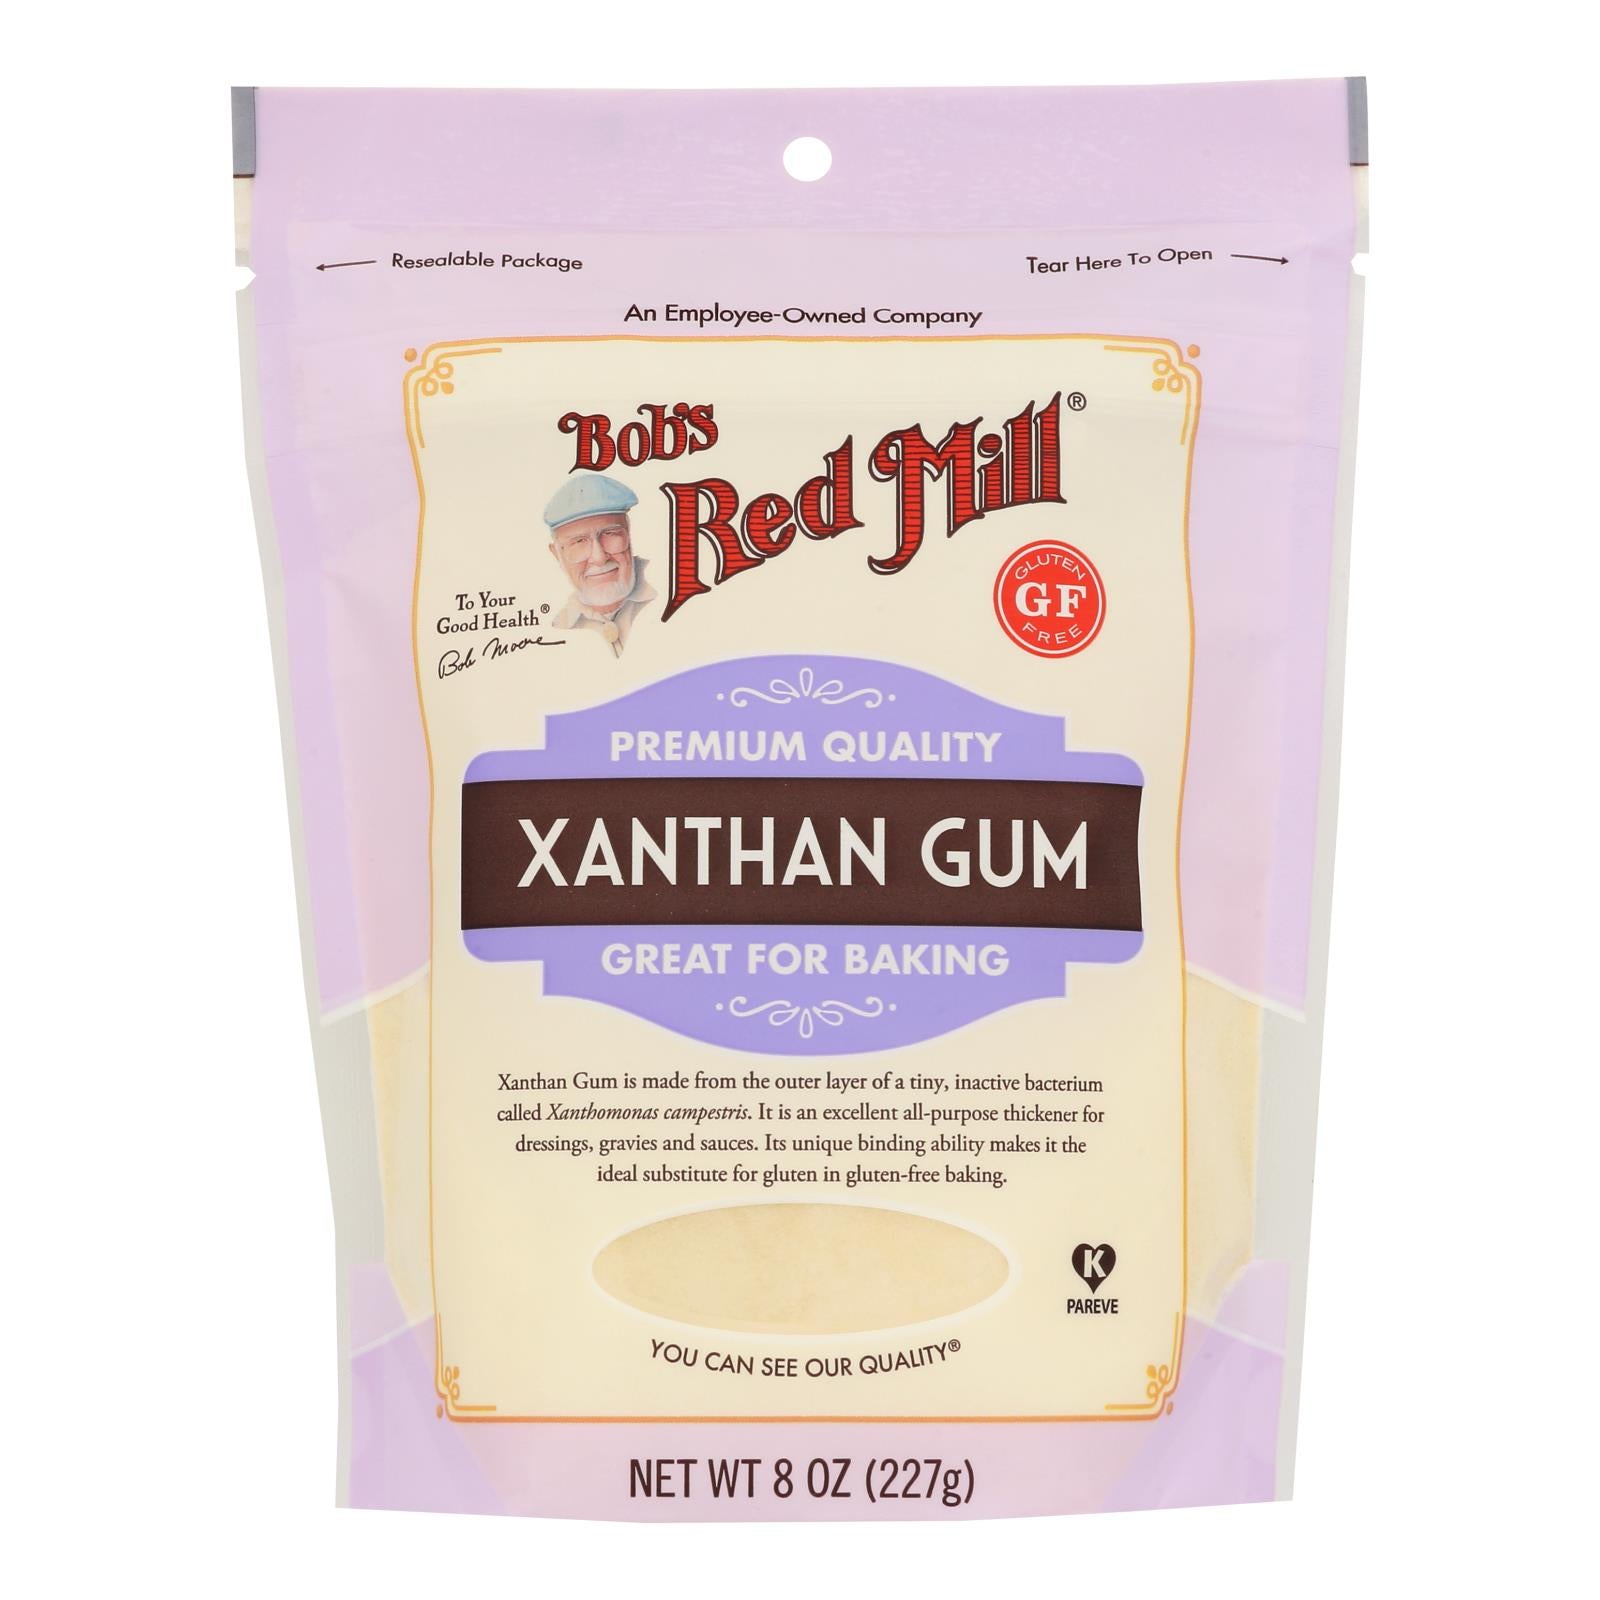 Bob's Red Mill - Xanthan Gum - Case Of 5-8 Oz